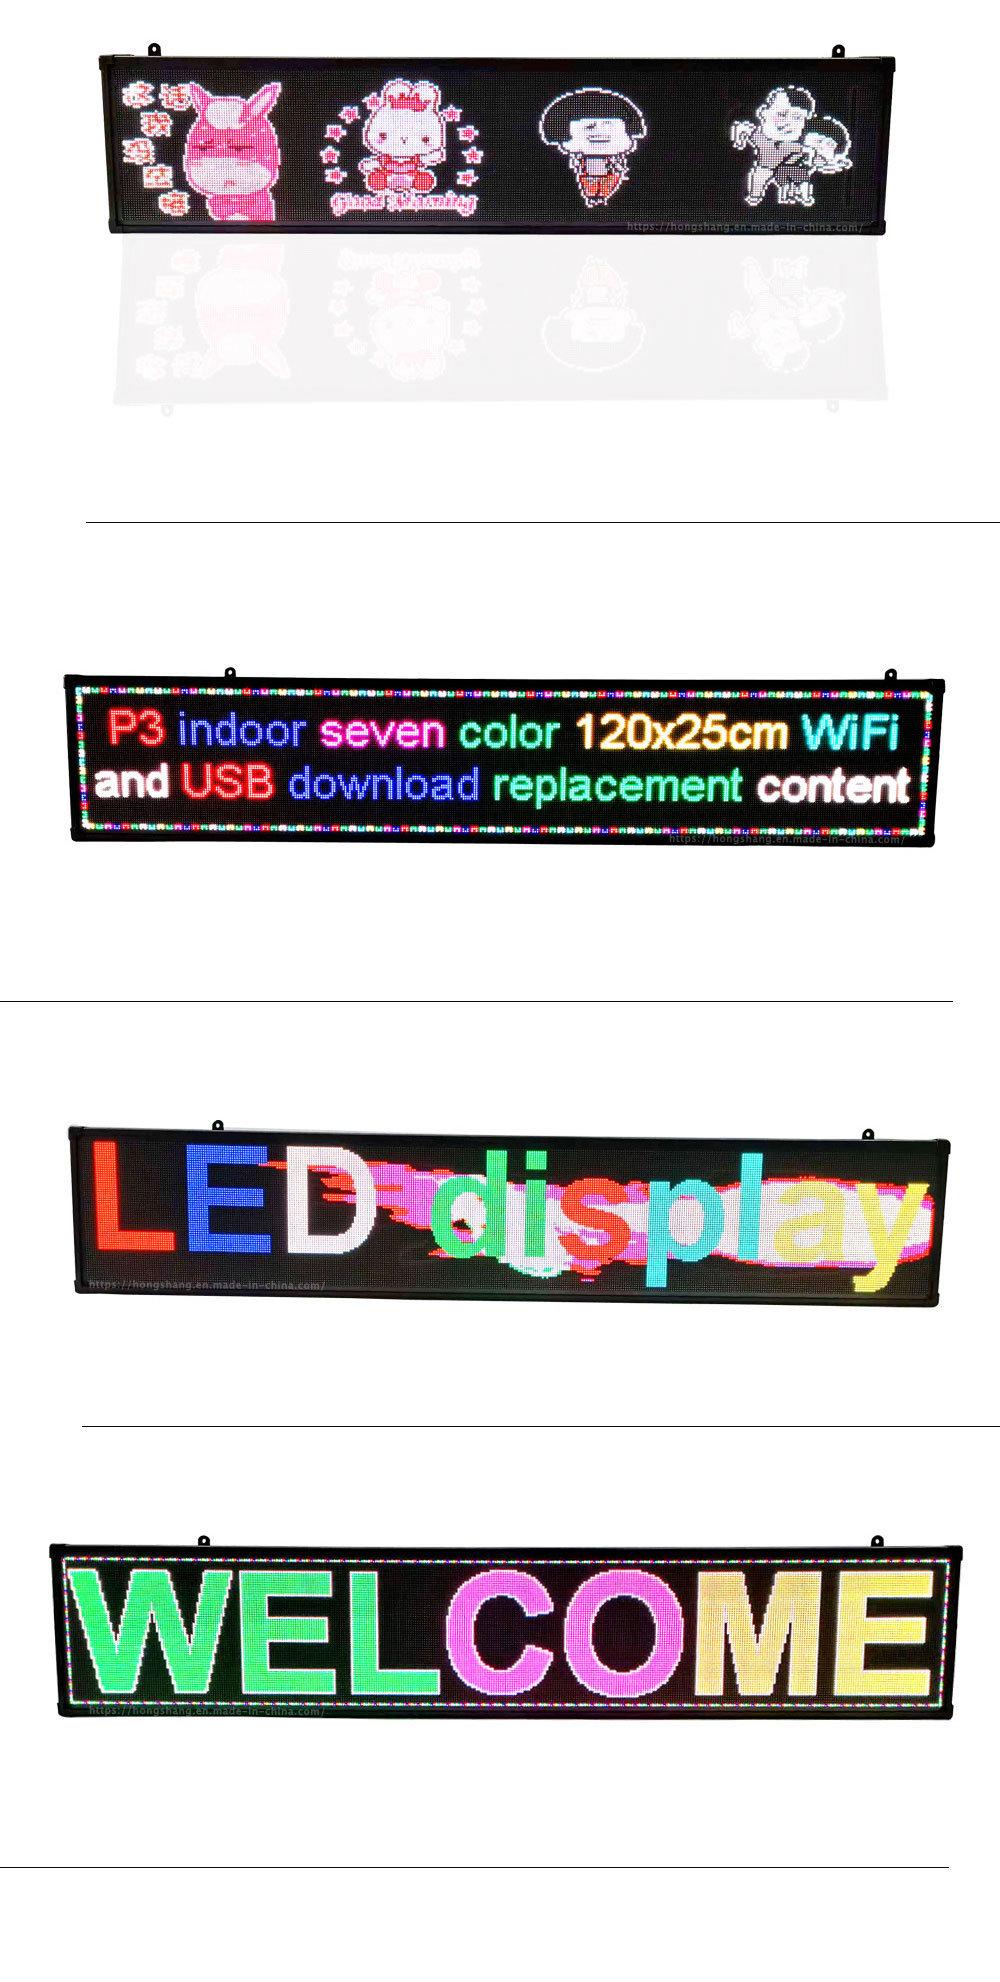 Insert P3 Full Color Interior Window Promotion Display Plate Directly